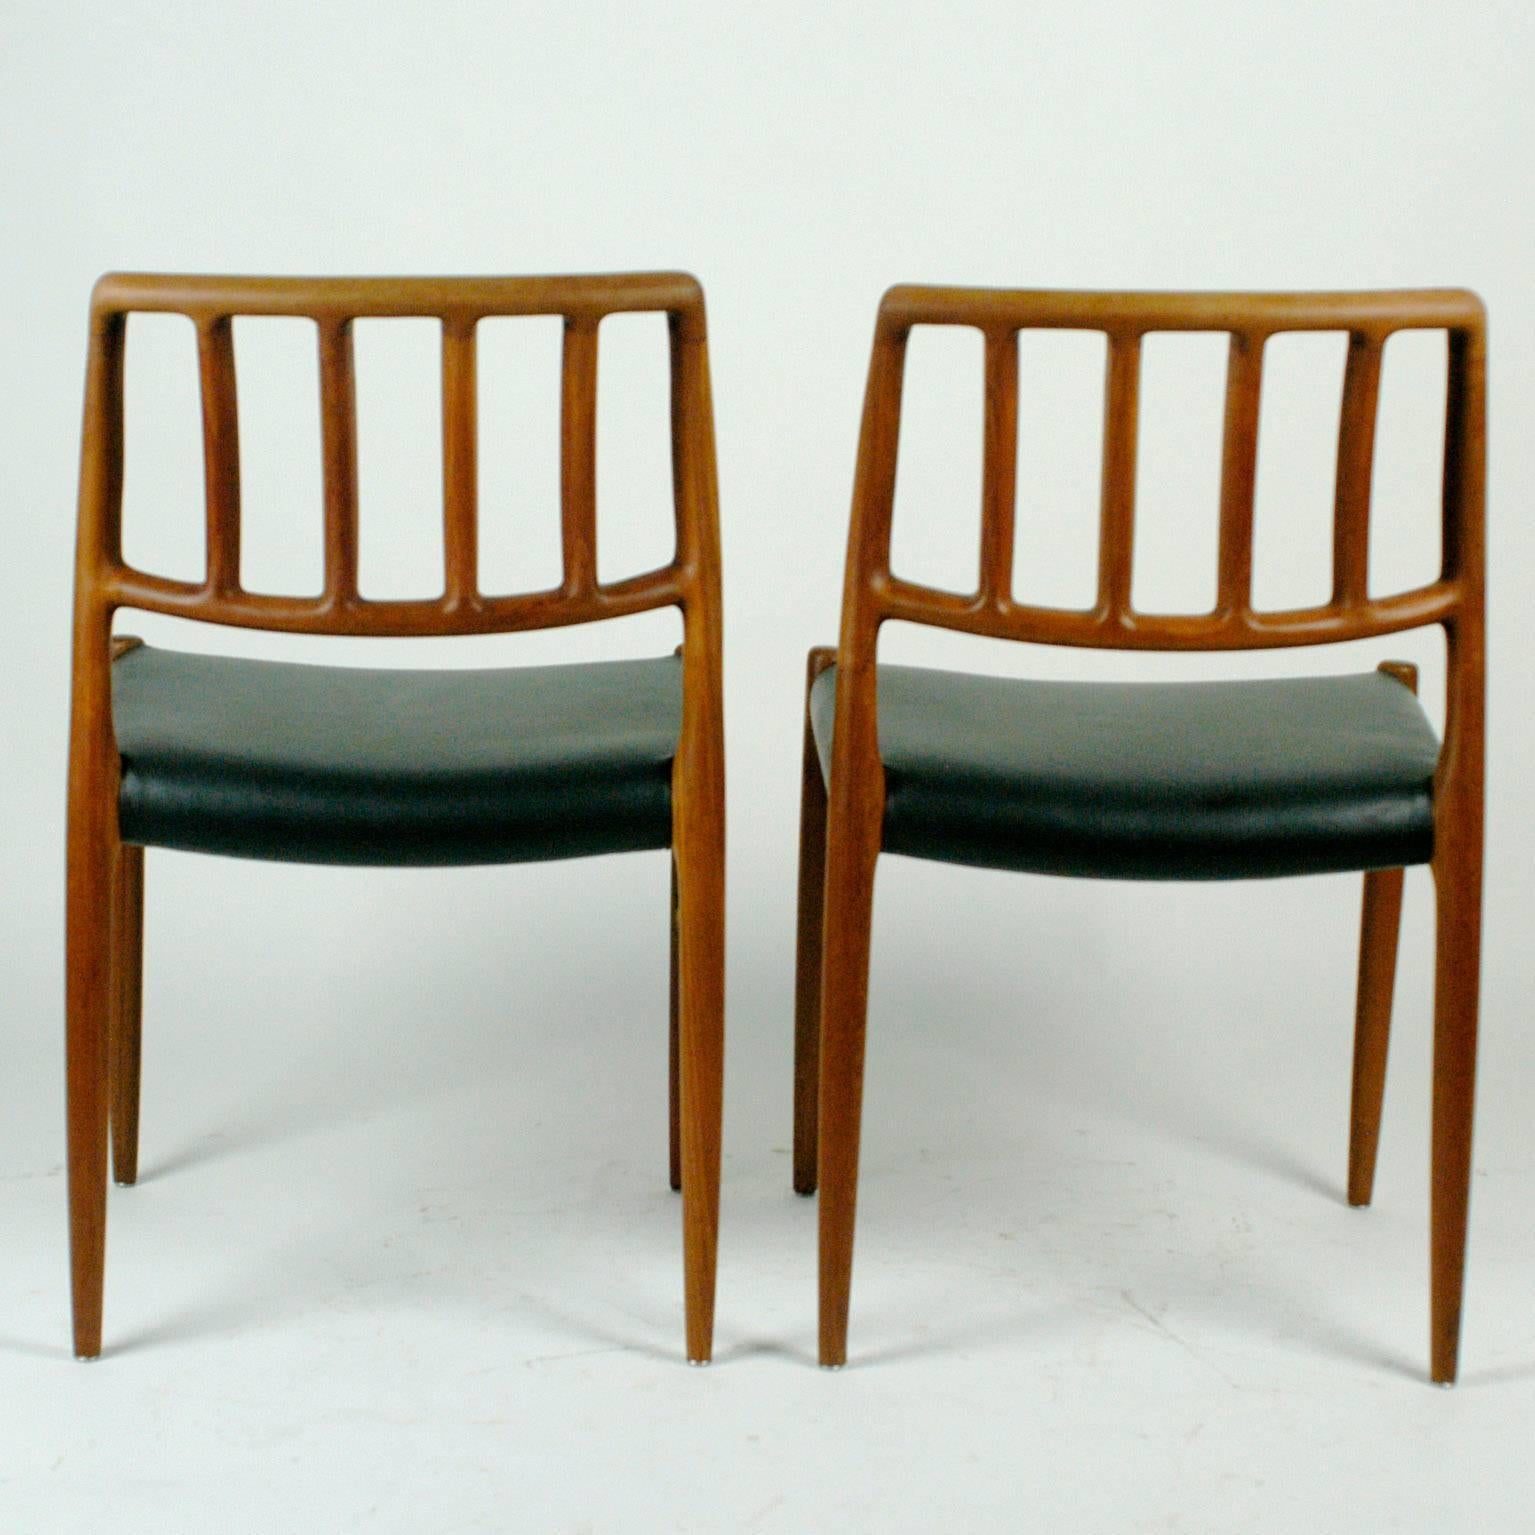 Two sculptural Danish teak dining chairs with black leather seats designed by Niels Otto Möller in the early 70s. 
Born in 1920 in Aarhus Denmark Moller is famous for his excellent designs and craftmenship of furniture He founded his own manufactury